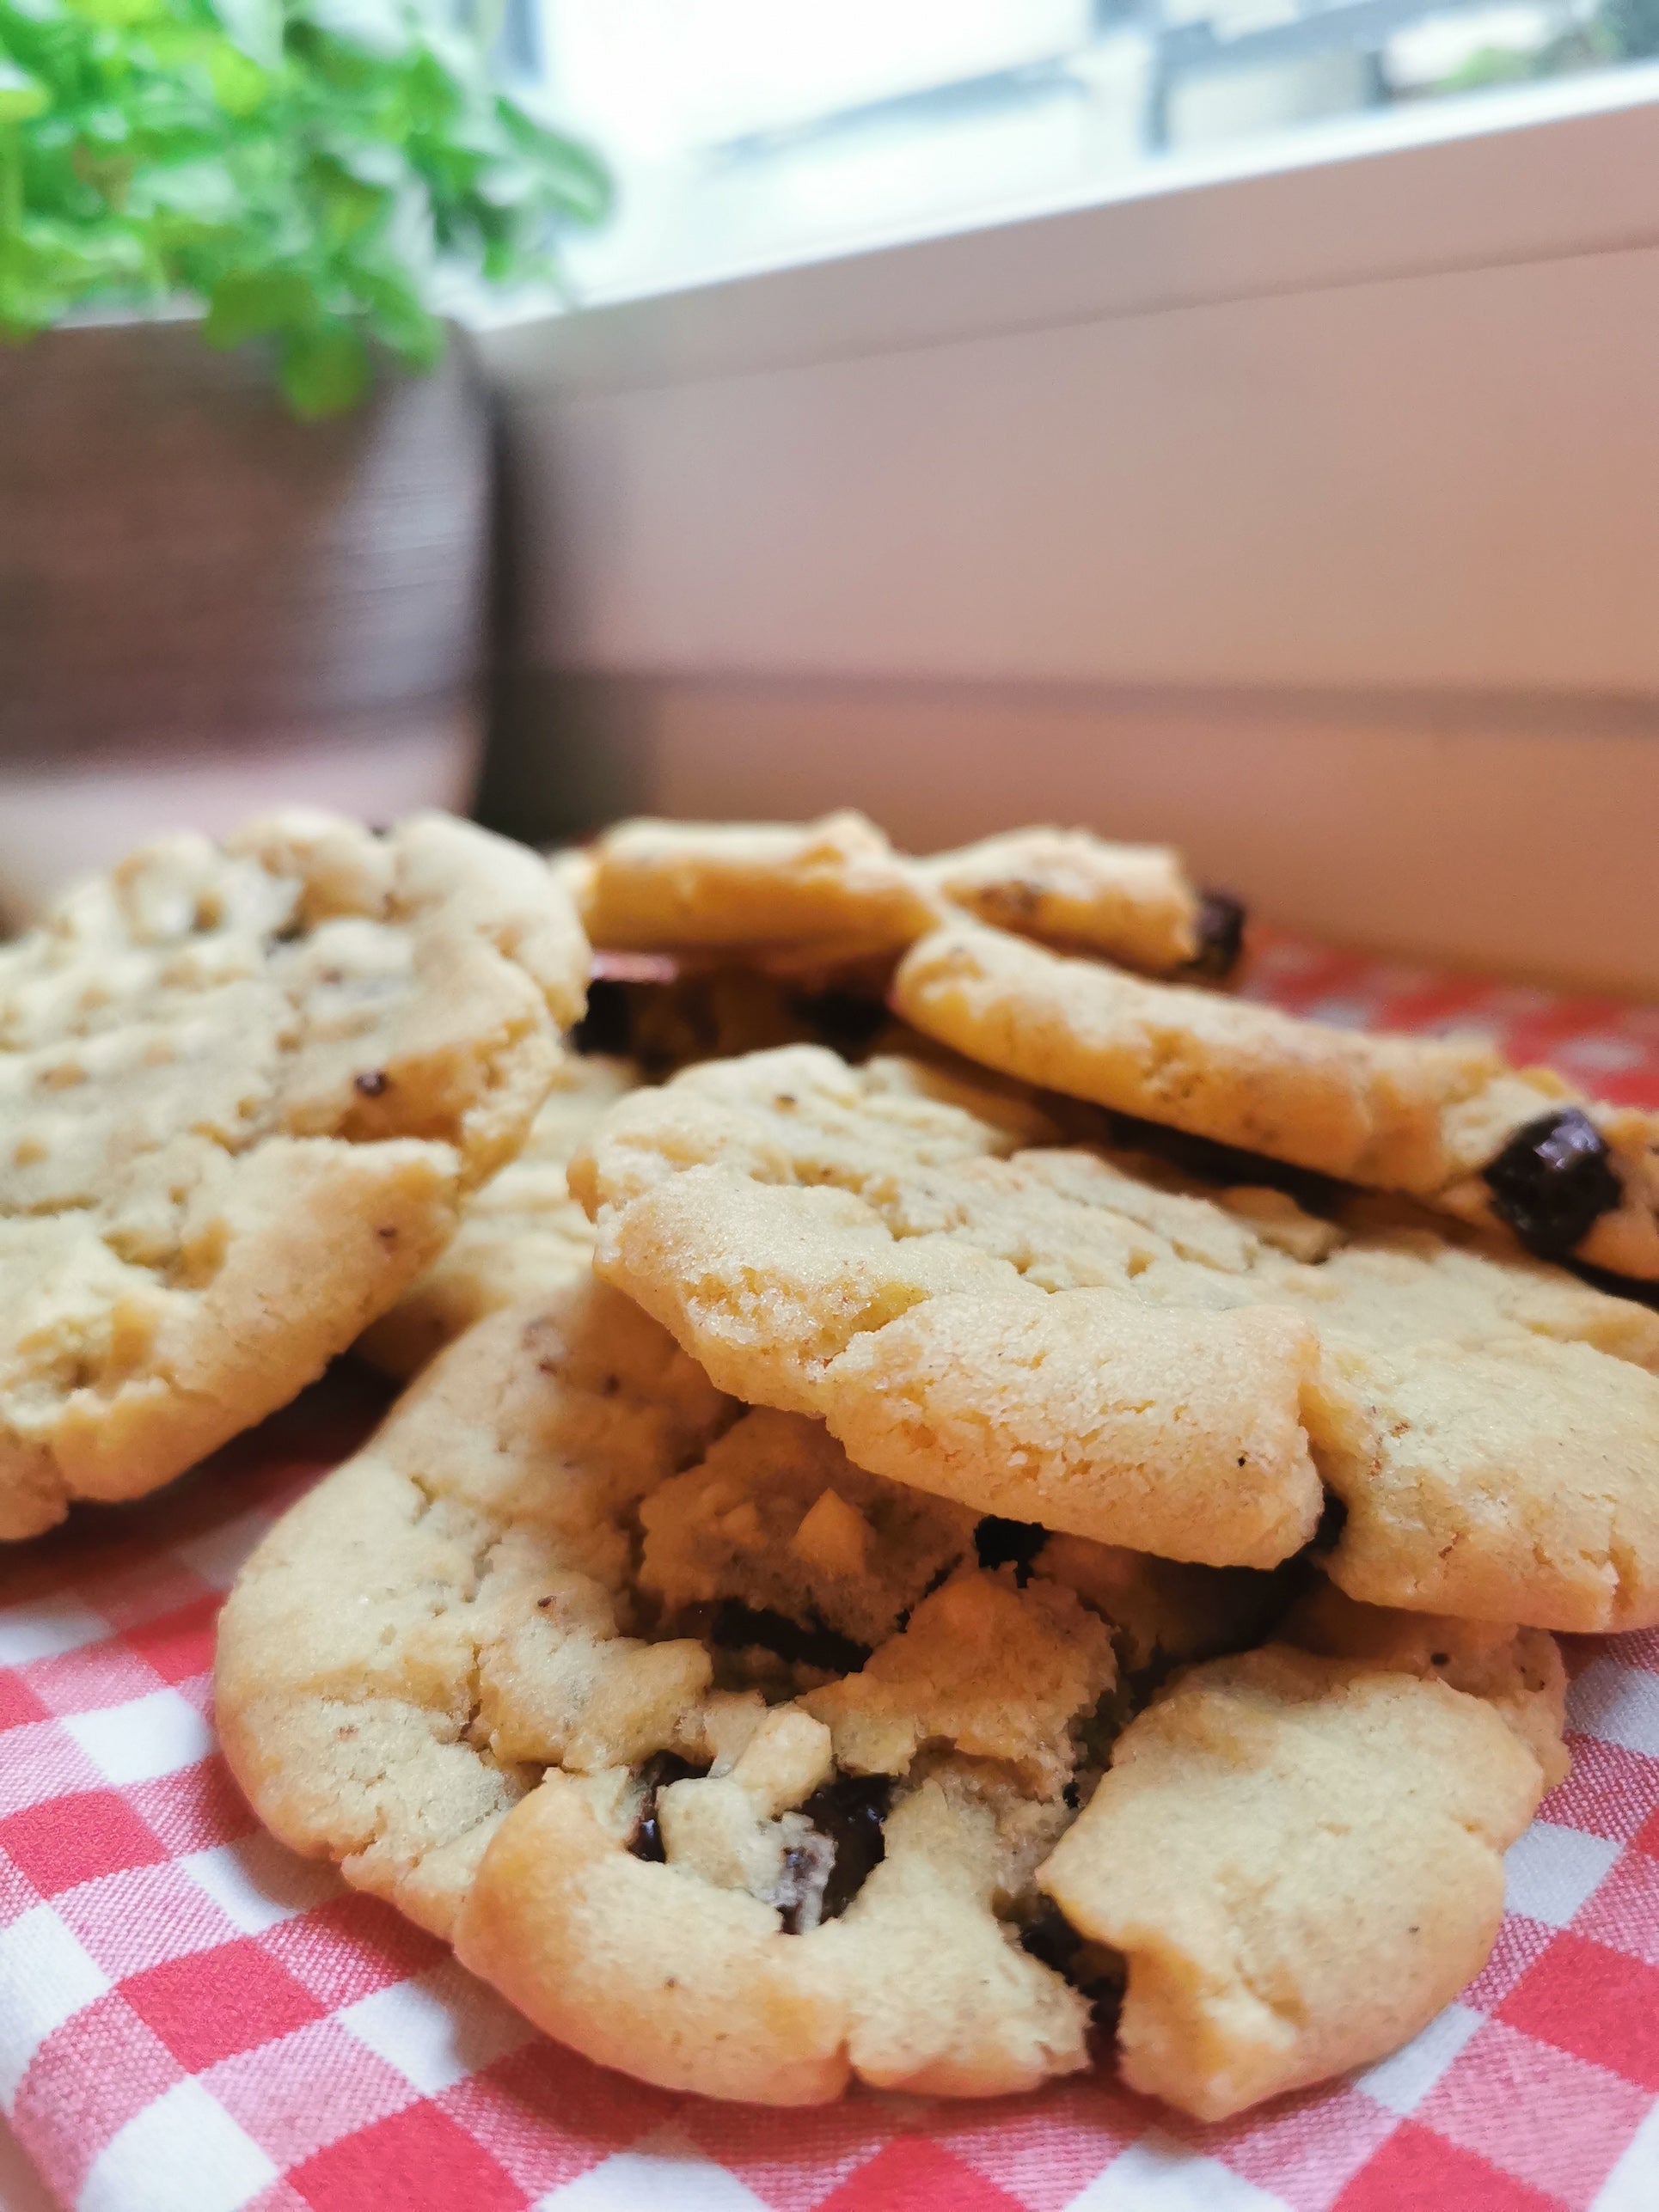 COOKIES - Salted Peanutbutter Chocolate Chip